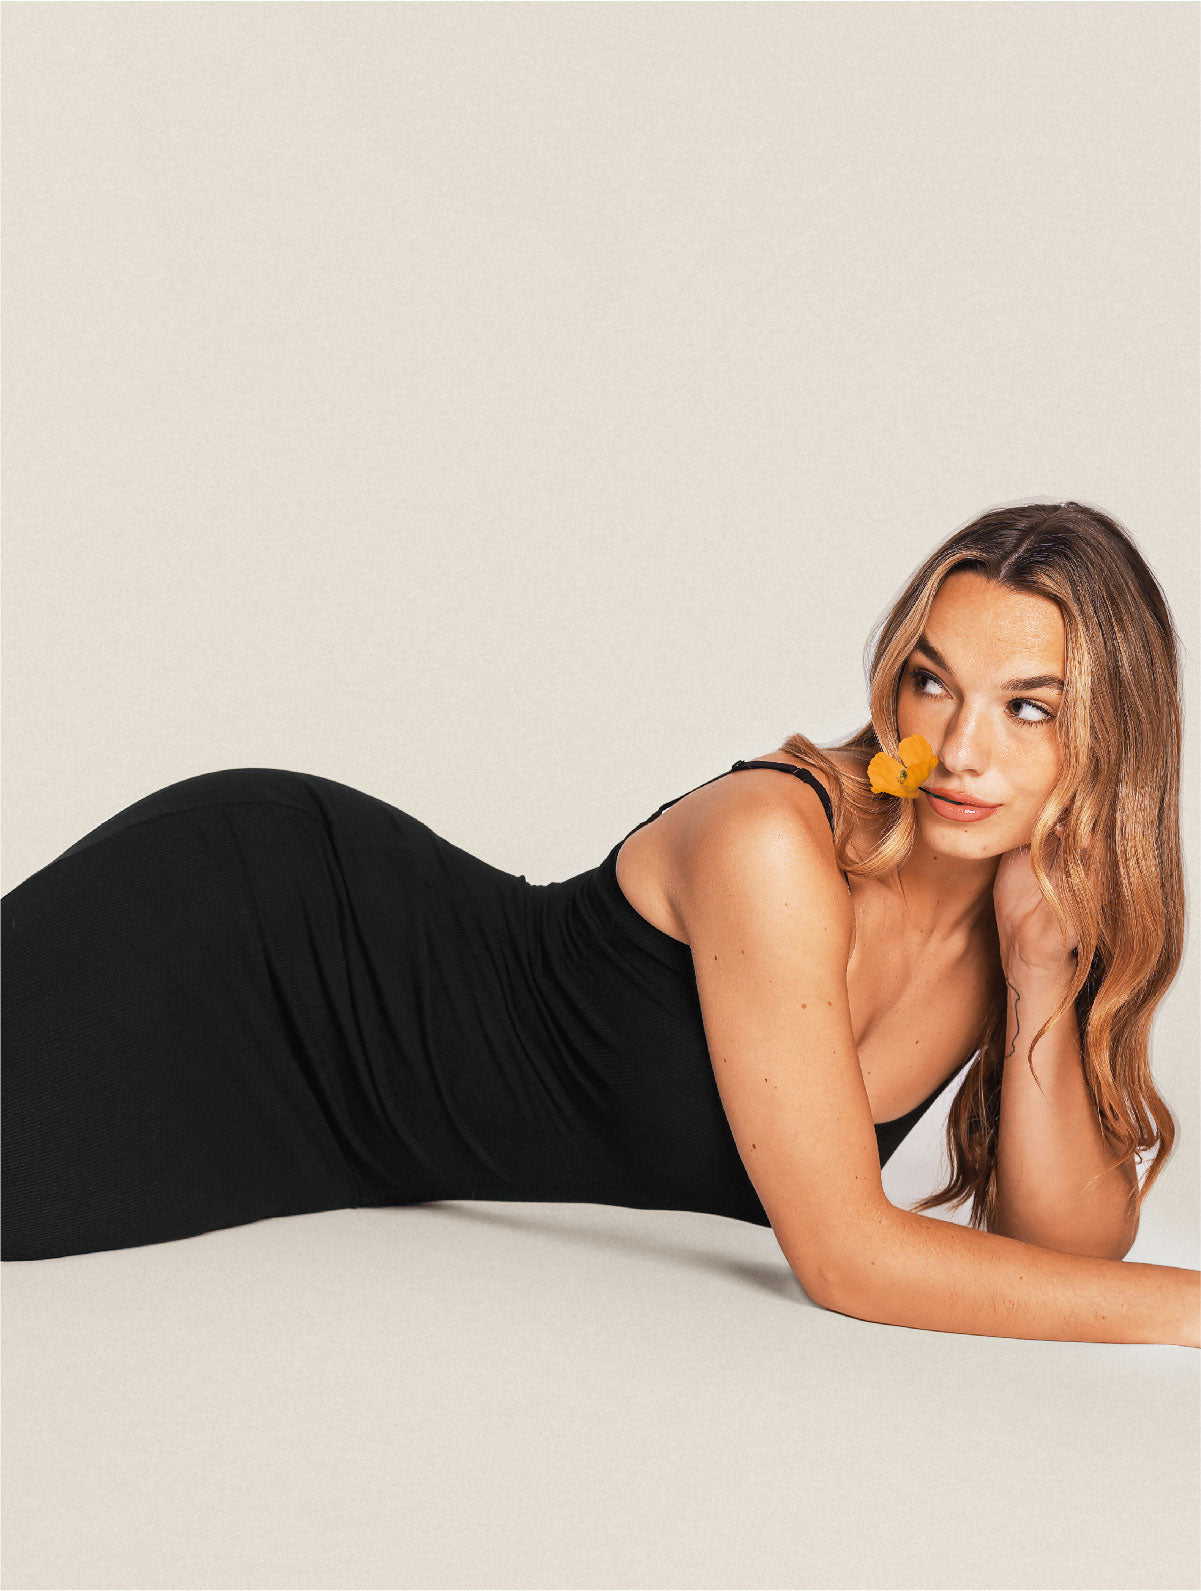 Popilush Shapewear Dresses the Best Choice For An Effortless Hourglass